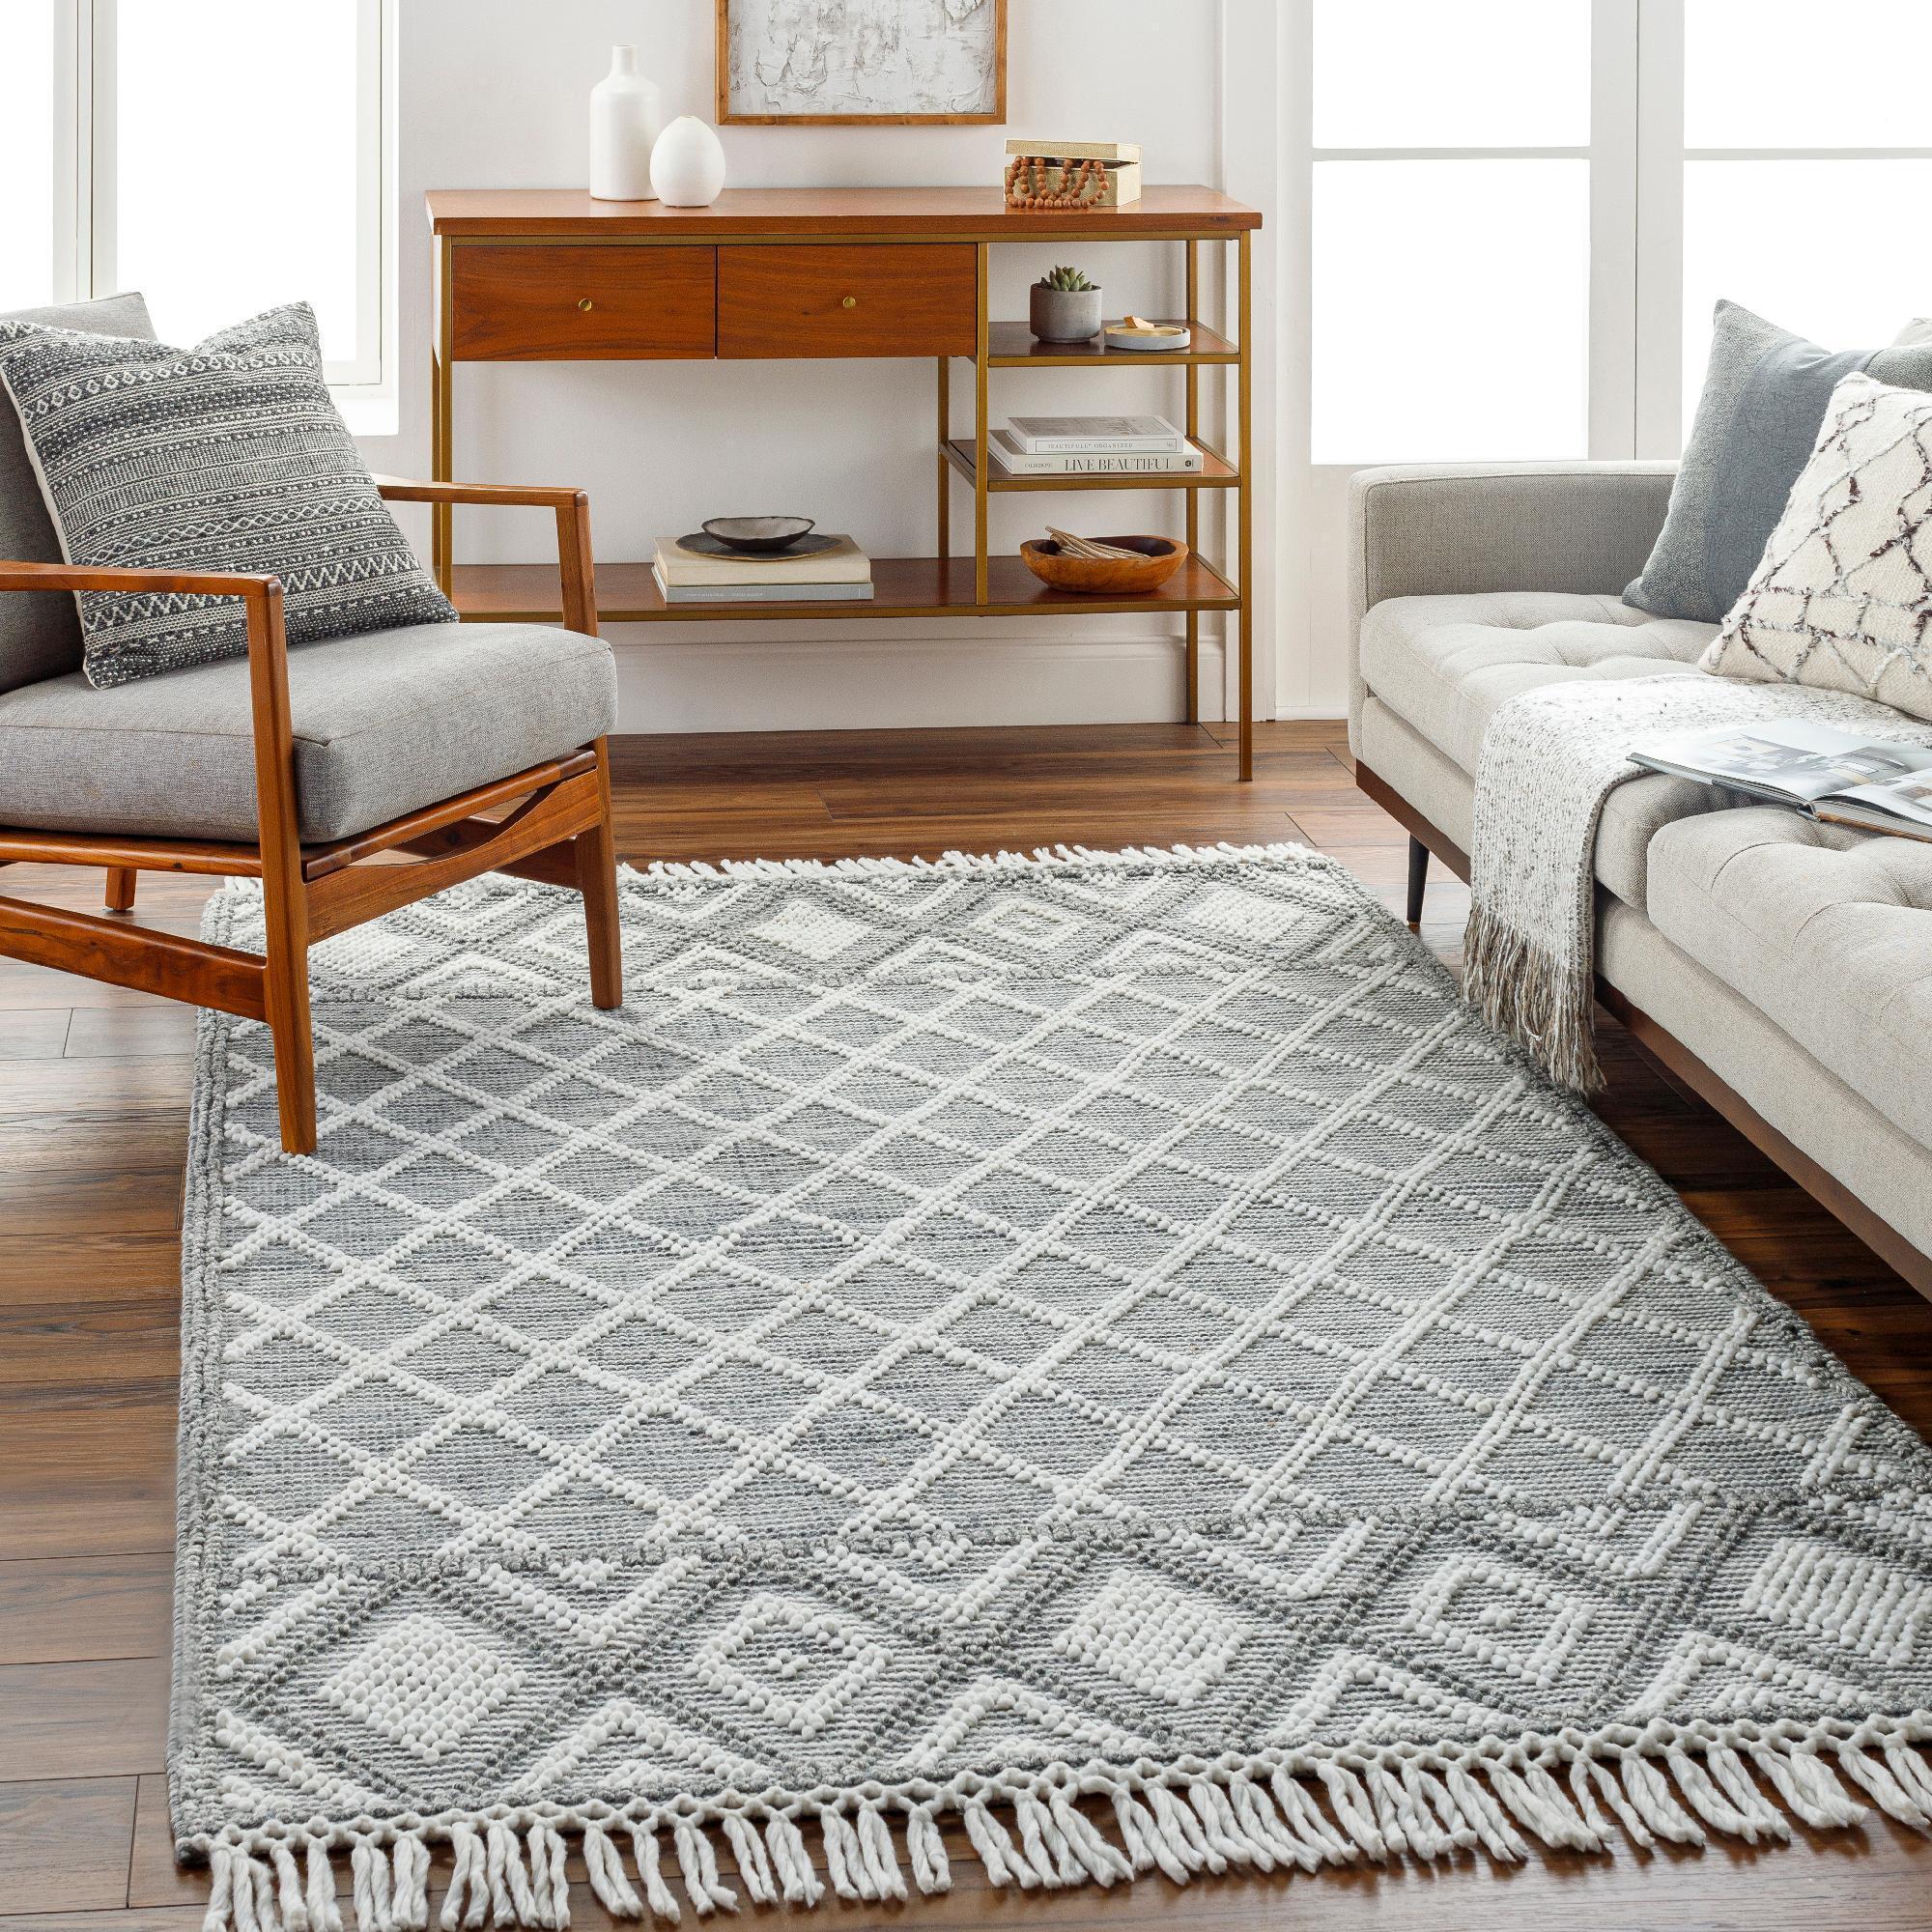 Mark&Day Area Rugs, 2x4 Ovgoros Global Light Gray Area Rug (2'3" x 3'9") - image 1 of 6